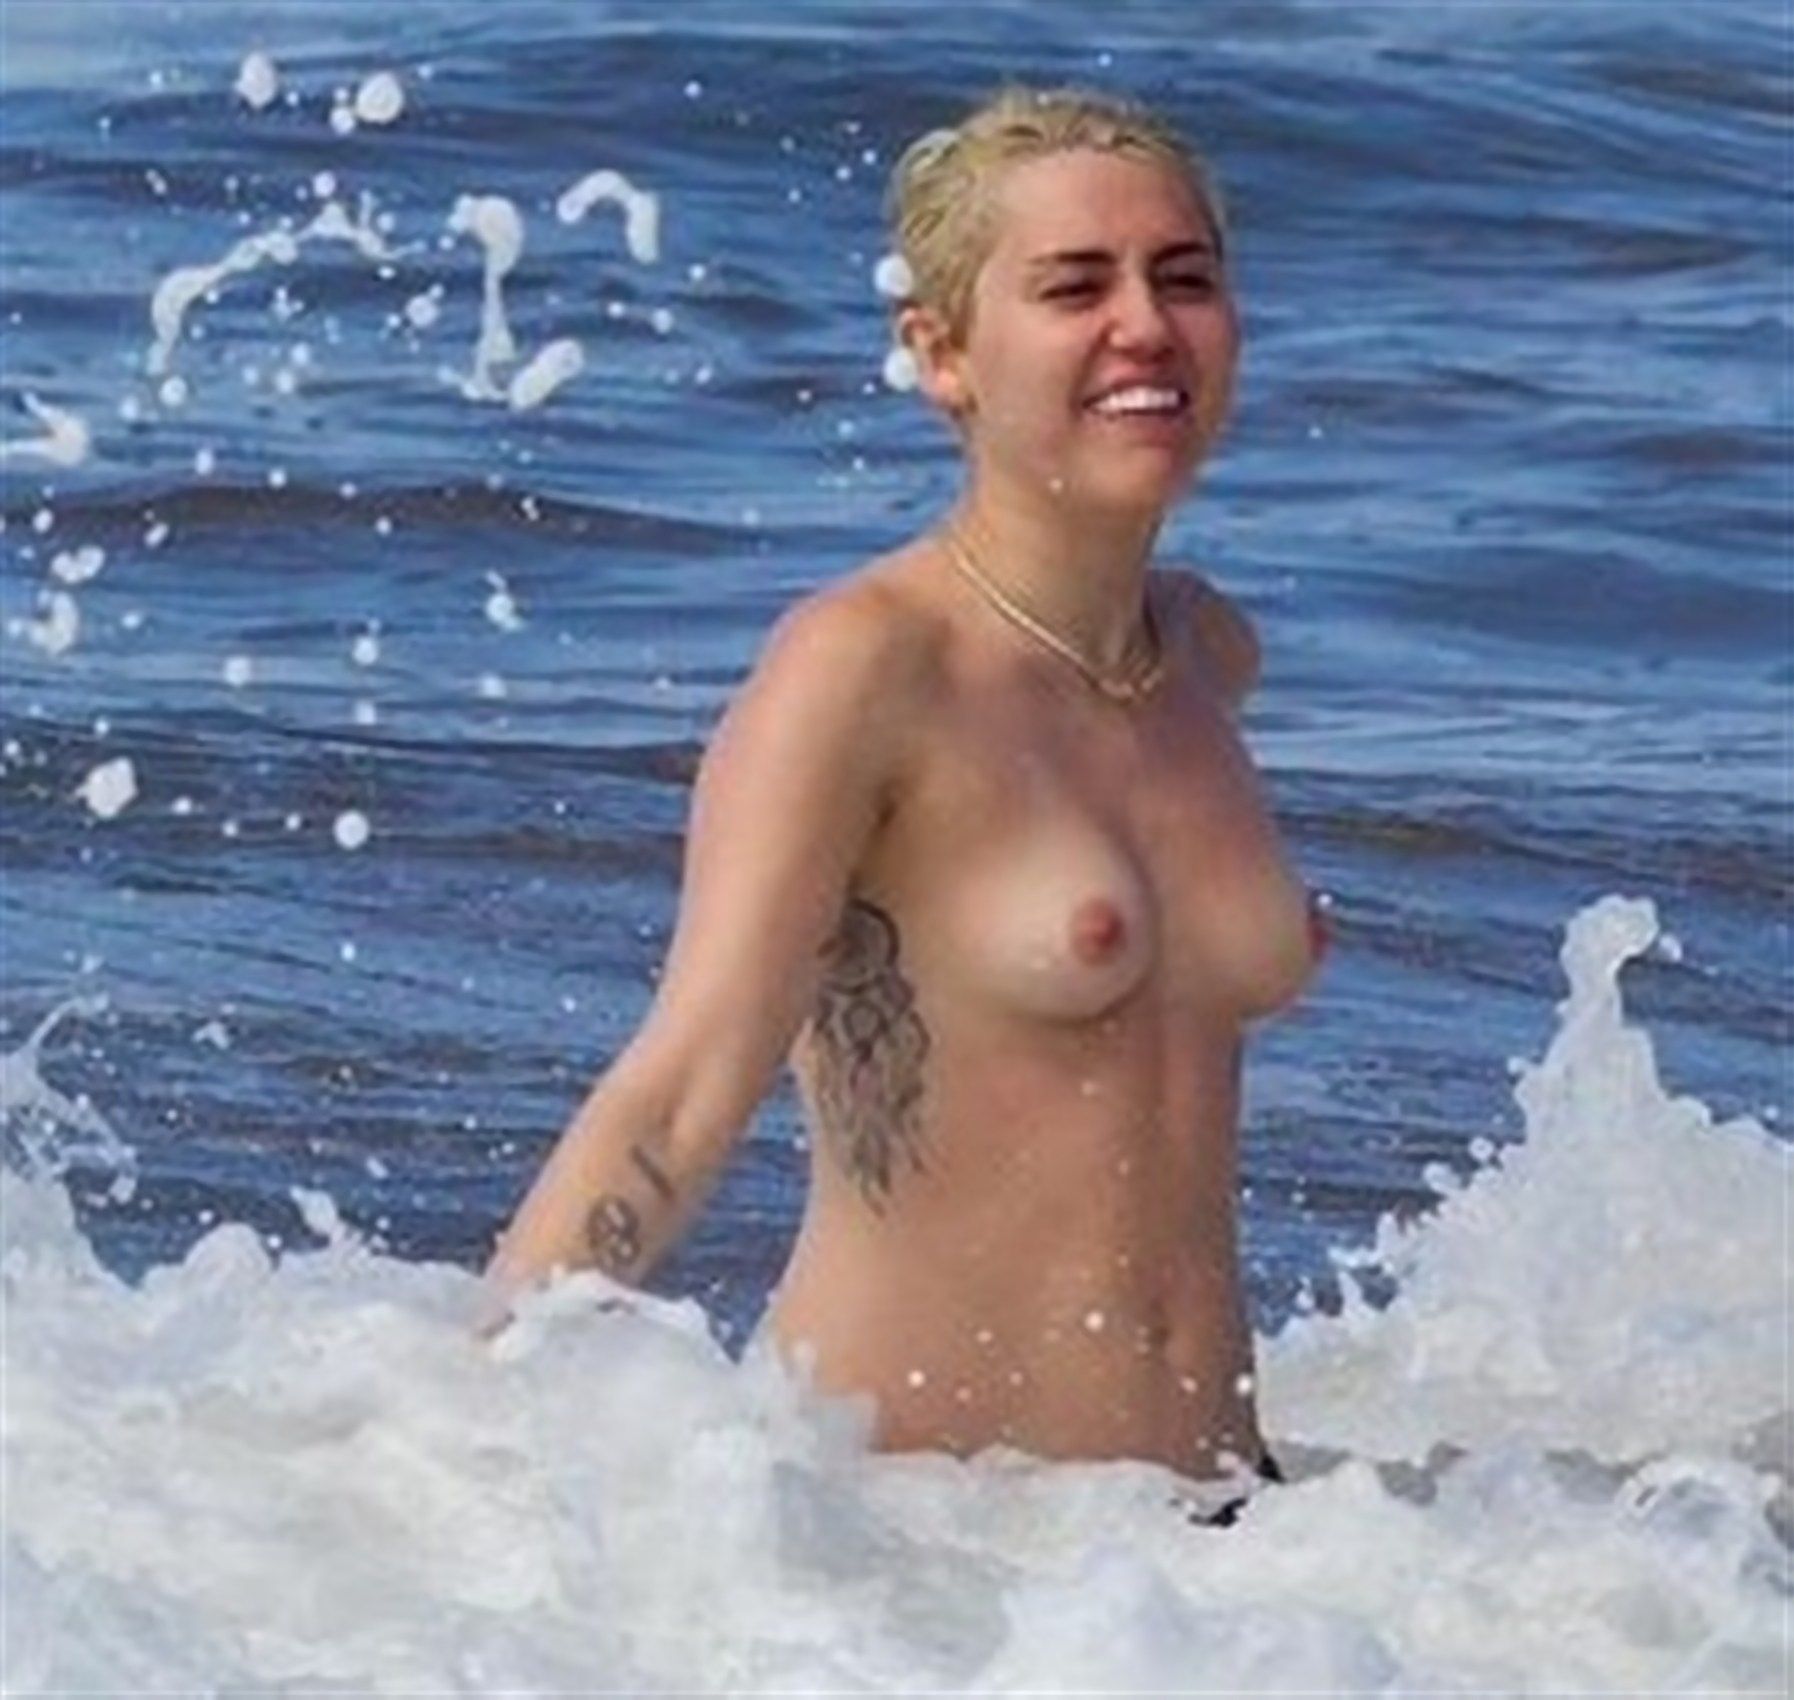 Miley Cyrus Tattoos and Topless at the Beach In Hawaii